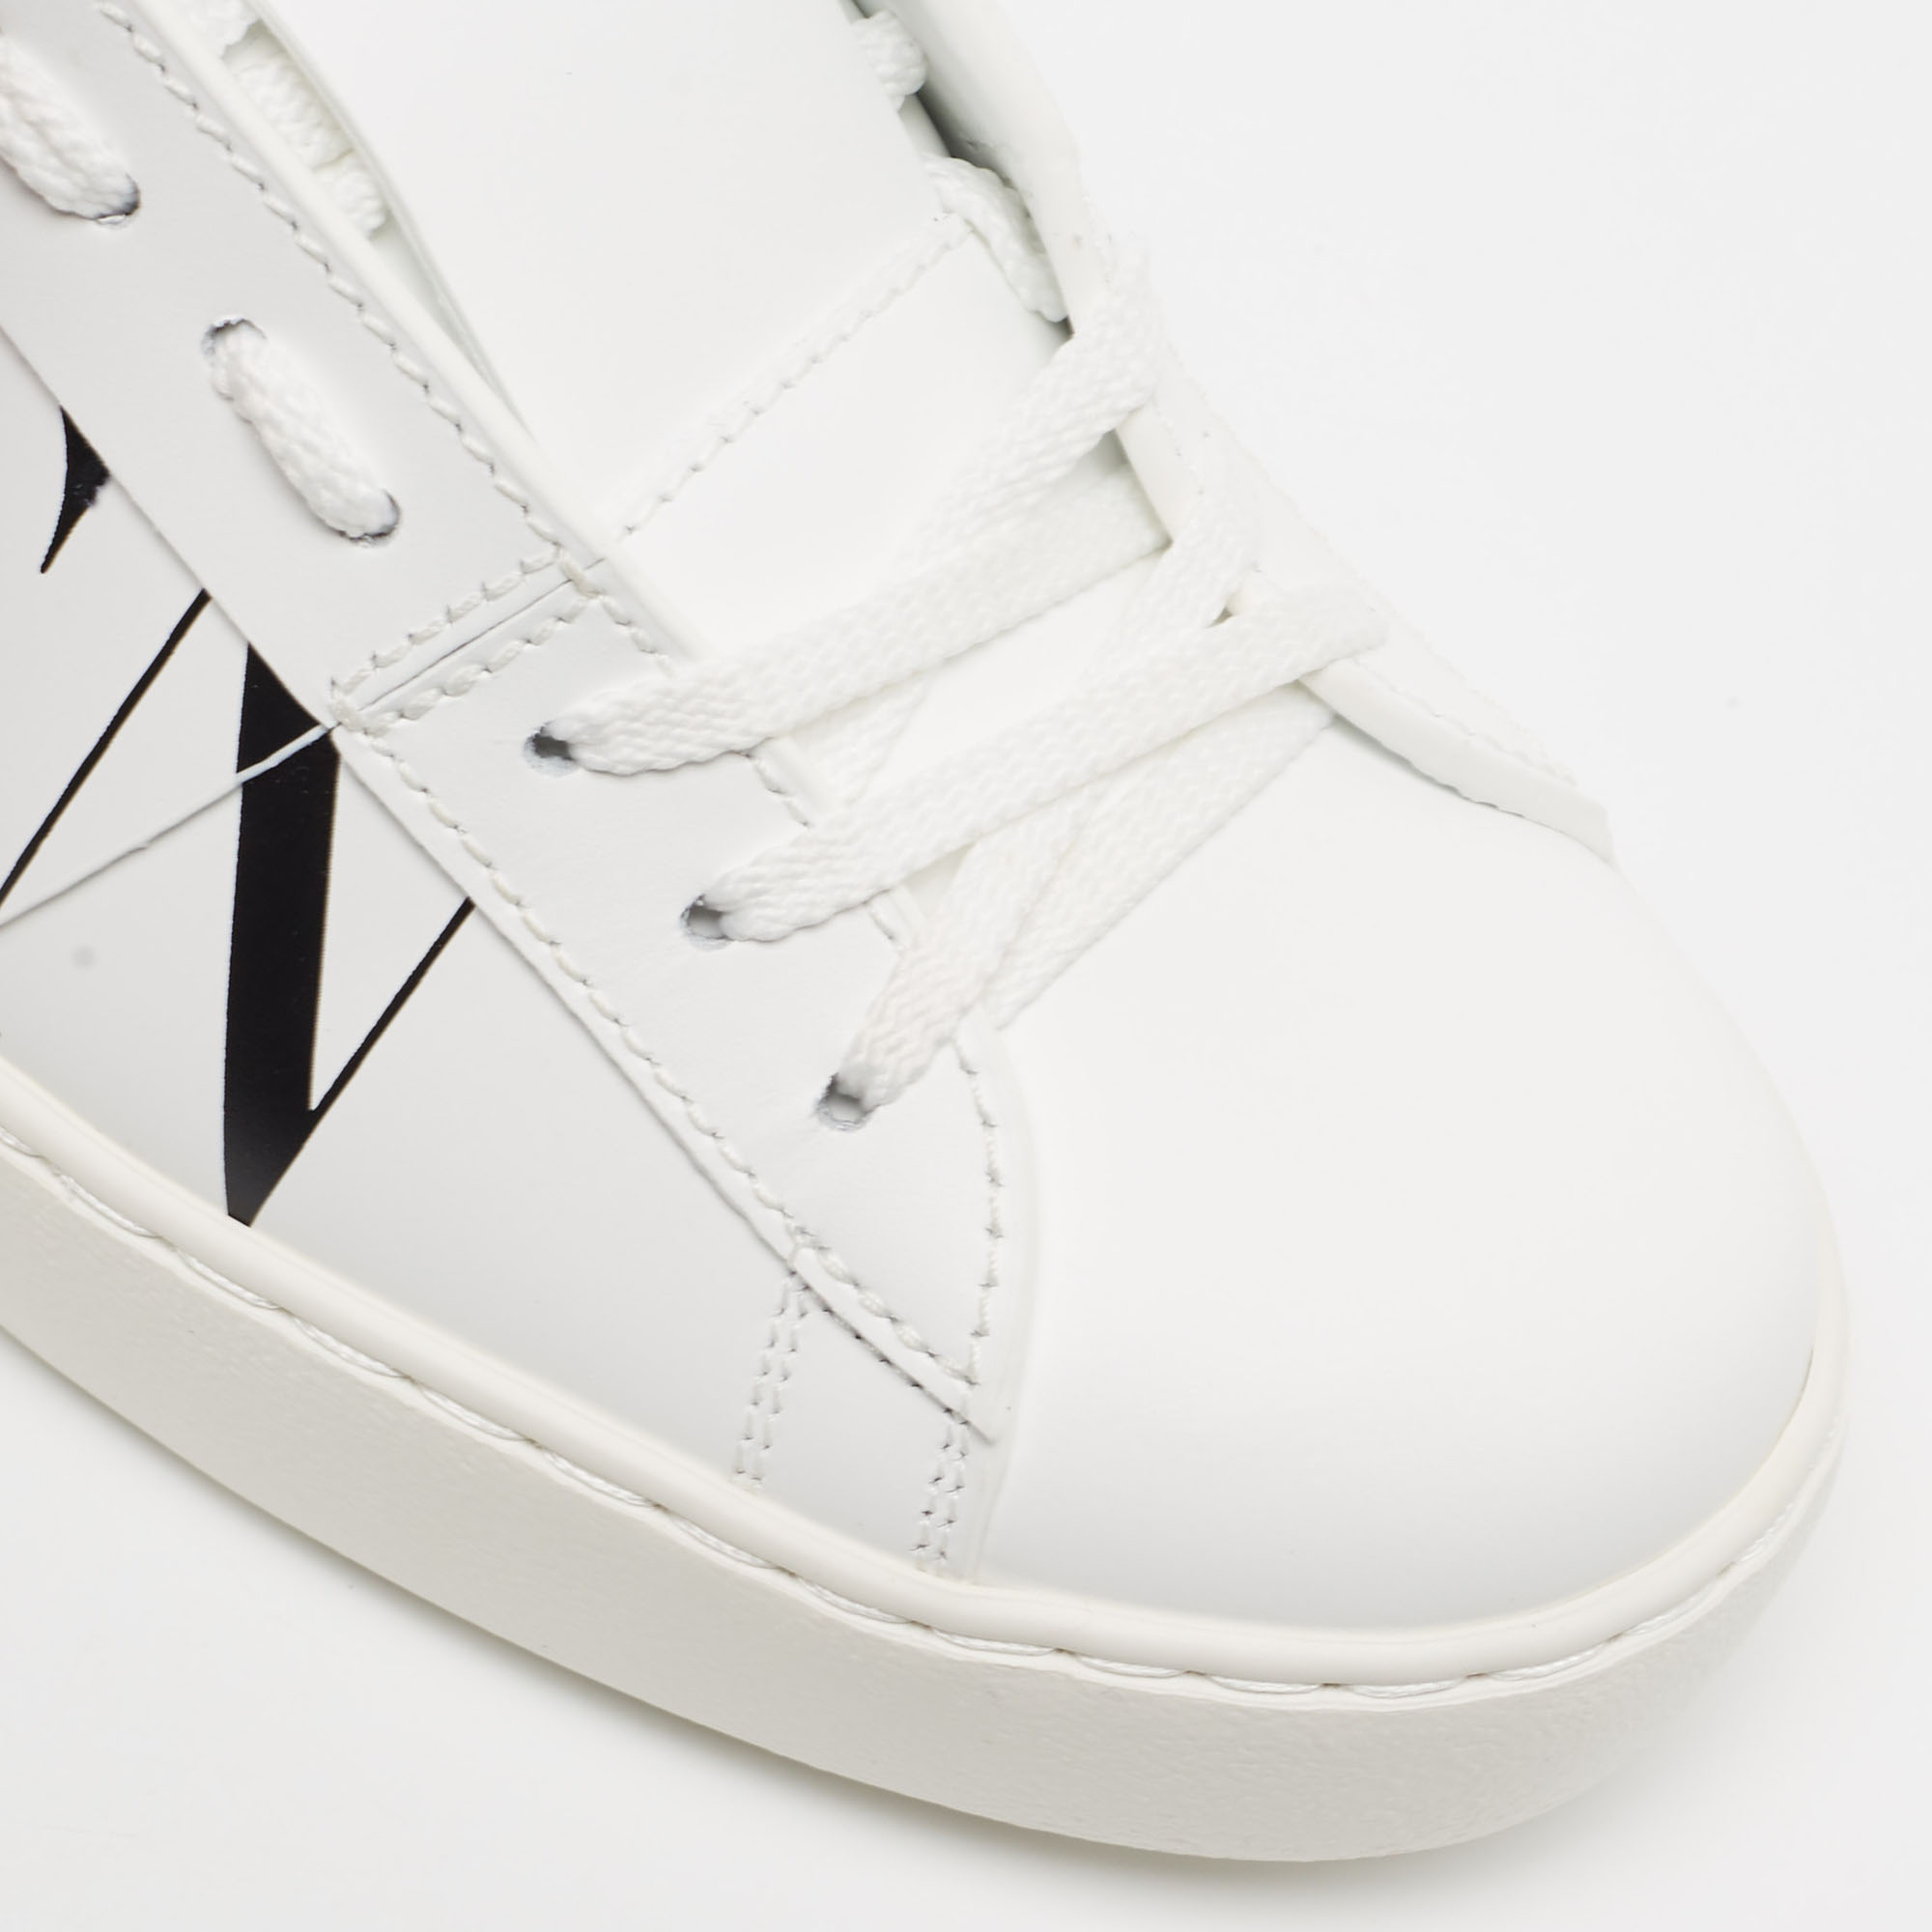 Valentino White Leather VLTN Open Sneakers Size 38